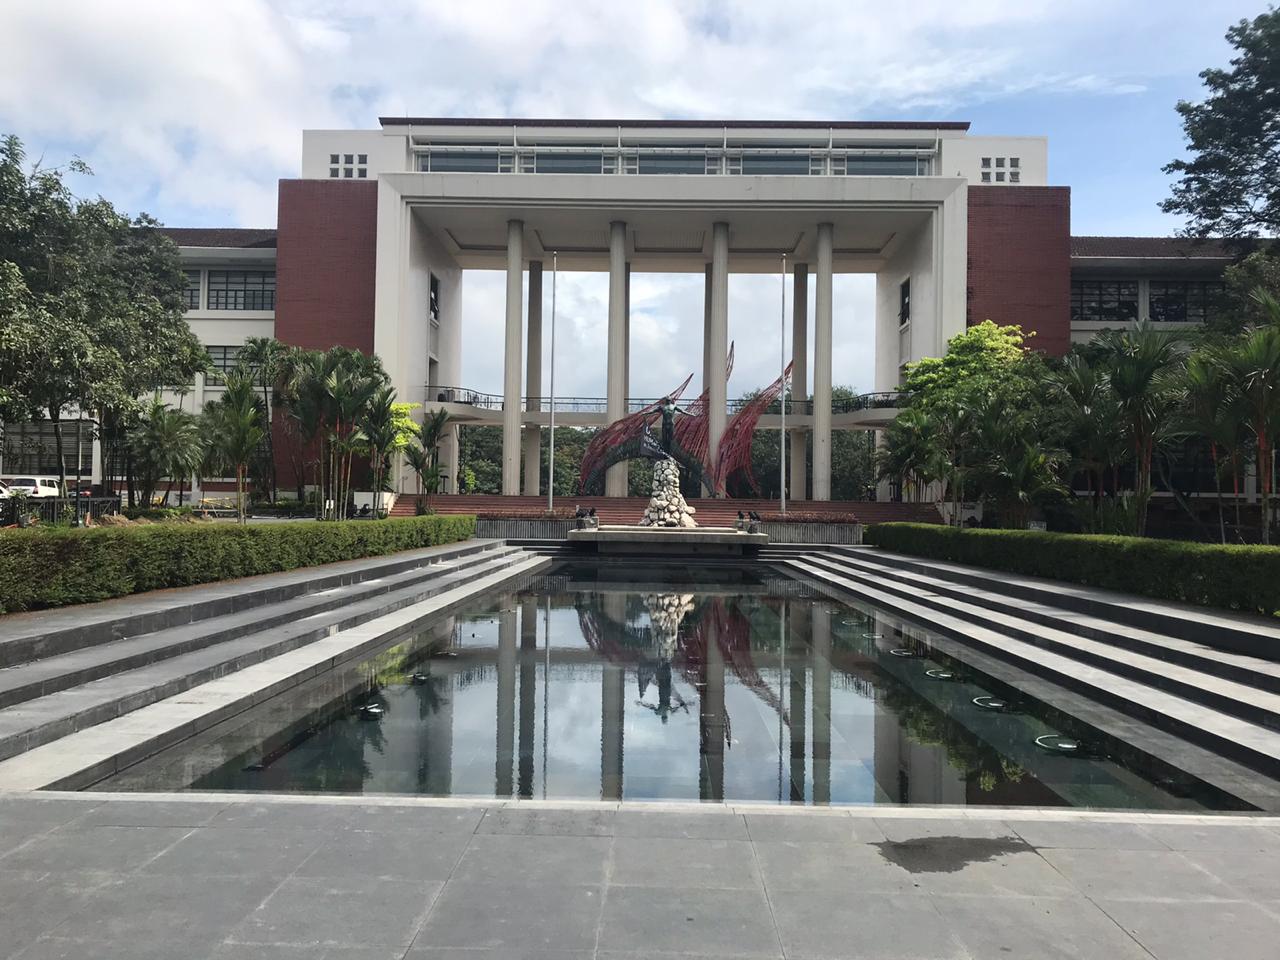 The University of the Philippines (UP), the country’s premier state university, dropped further in this year’s Asian university rankings published by a United Kingdom-based higher education magazine, ending up in 129th place from its previous ranking of 84th.